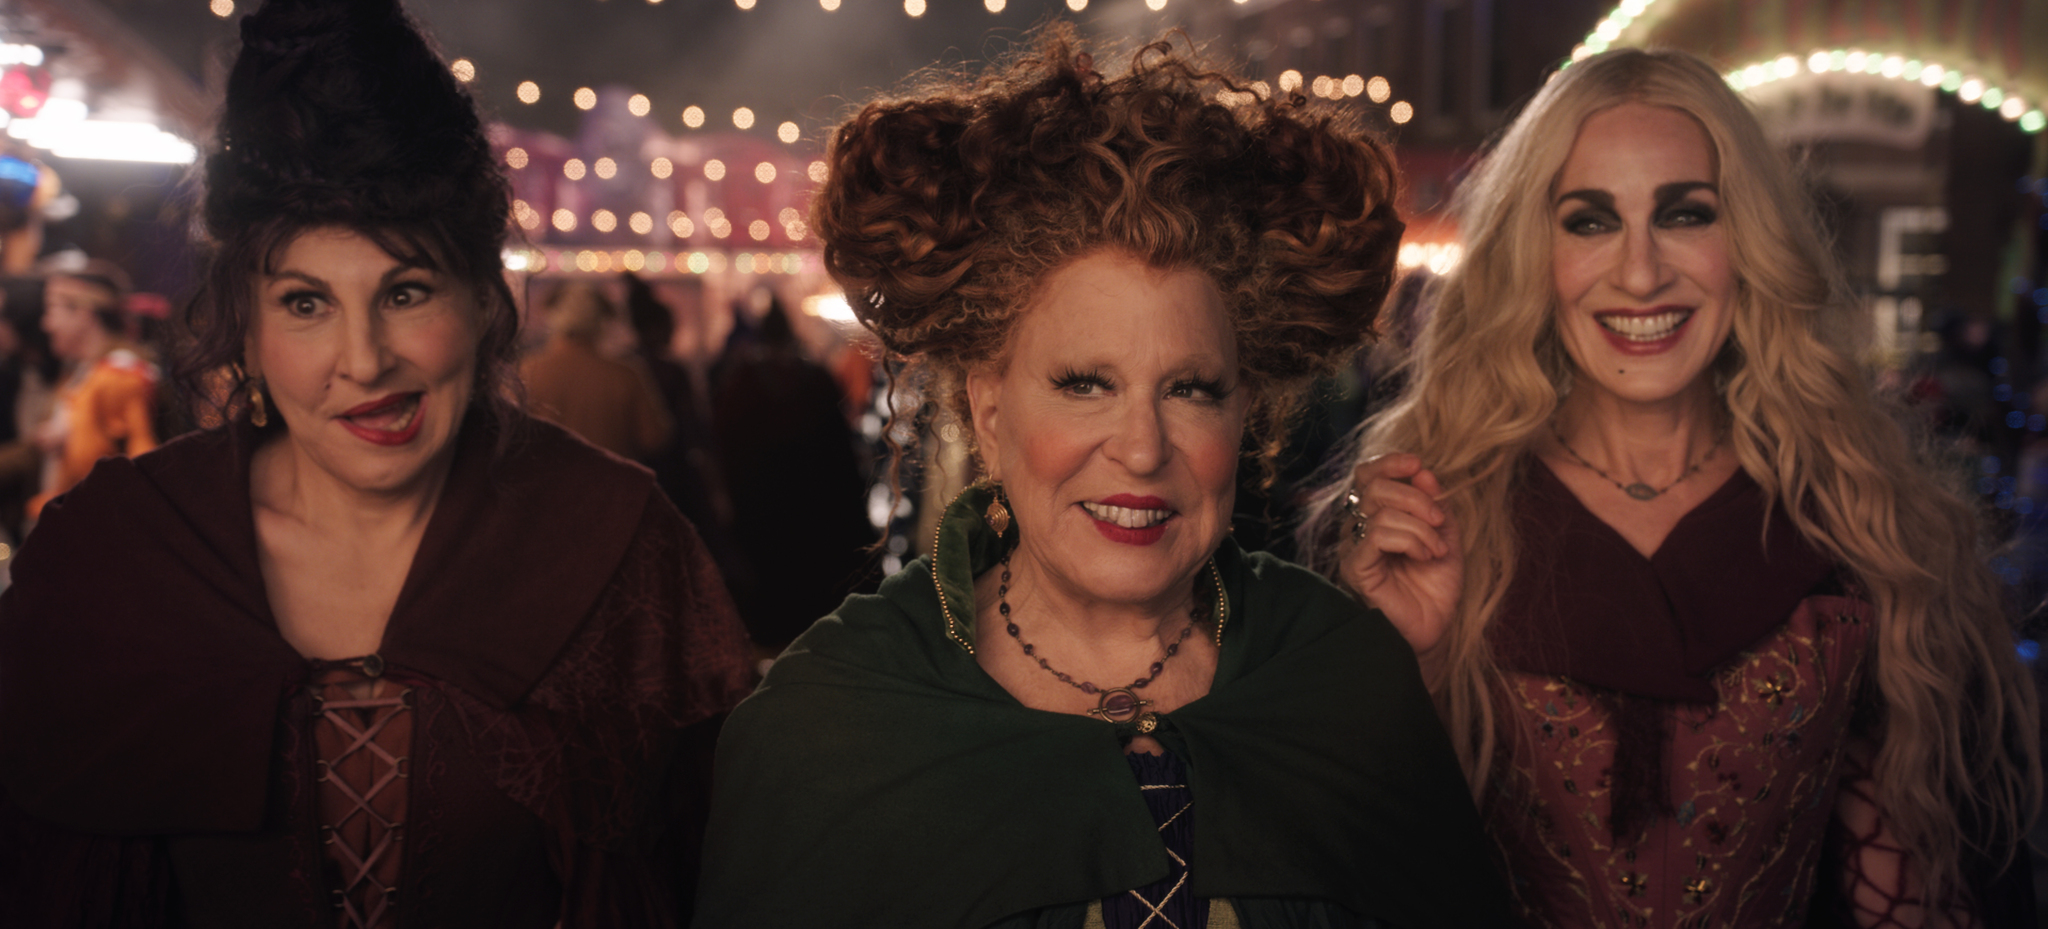 ‘Hocus Pocus 2’ will reveal the bewitching origins of the Sanderson sisters